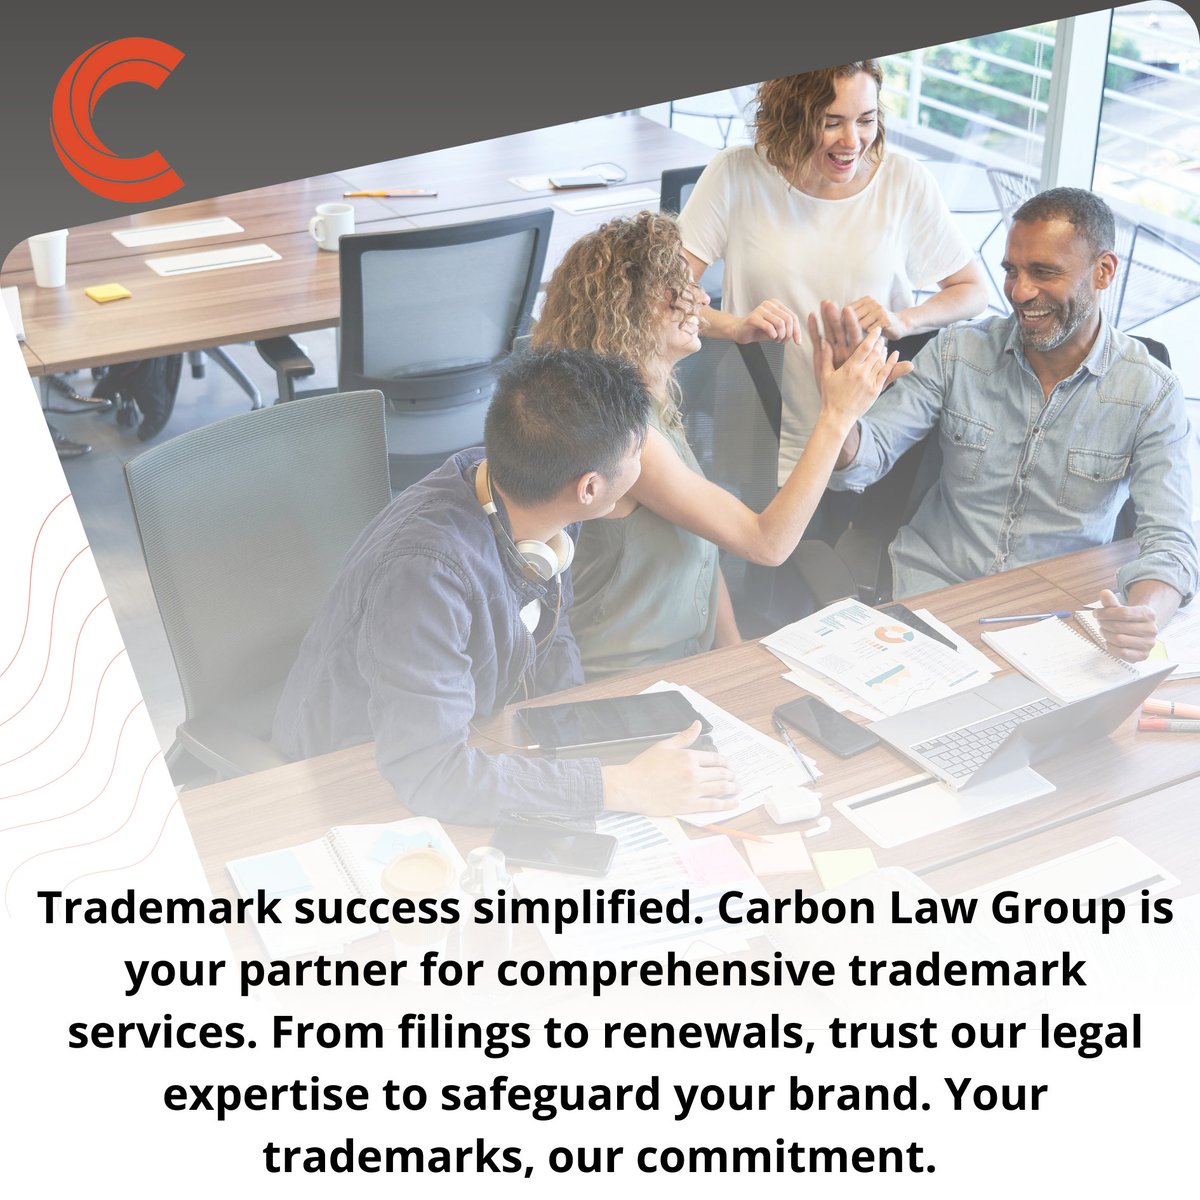 Trademark success simplified. Carbon Law Group is your partner for comprehensive trademark services. From filings to renewals, trust our legal expertise to safeguard your brand. Your trademarks, our commitment. 

#TrademarkProtection #LegalPartnership #CarbonLawGroup